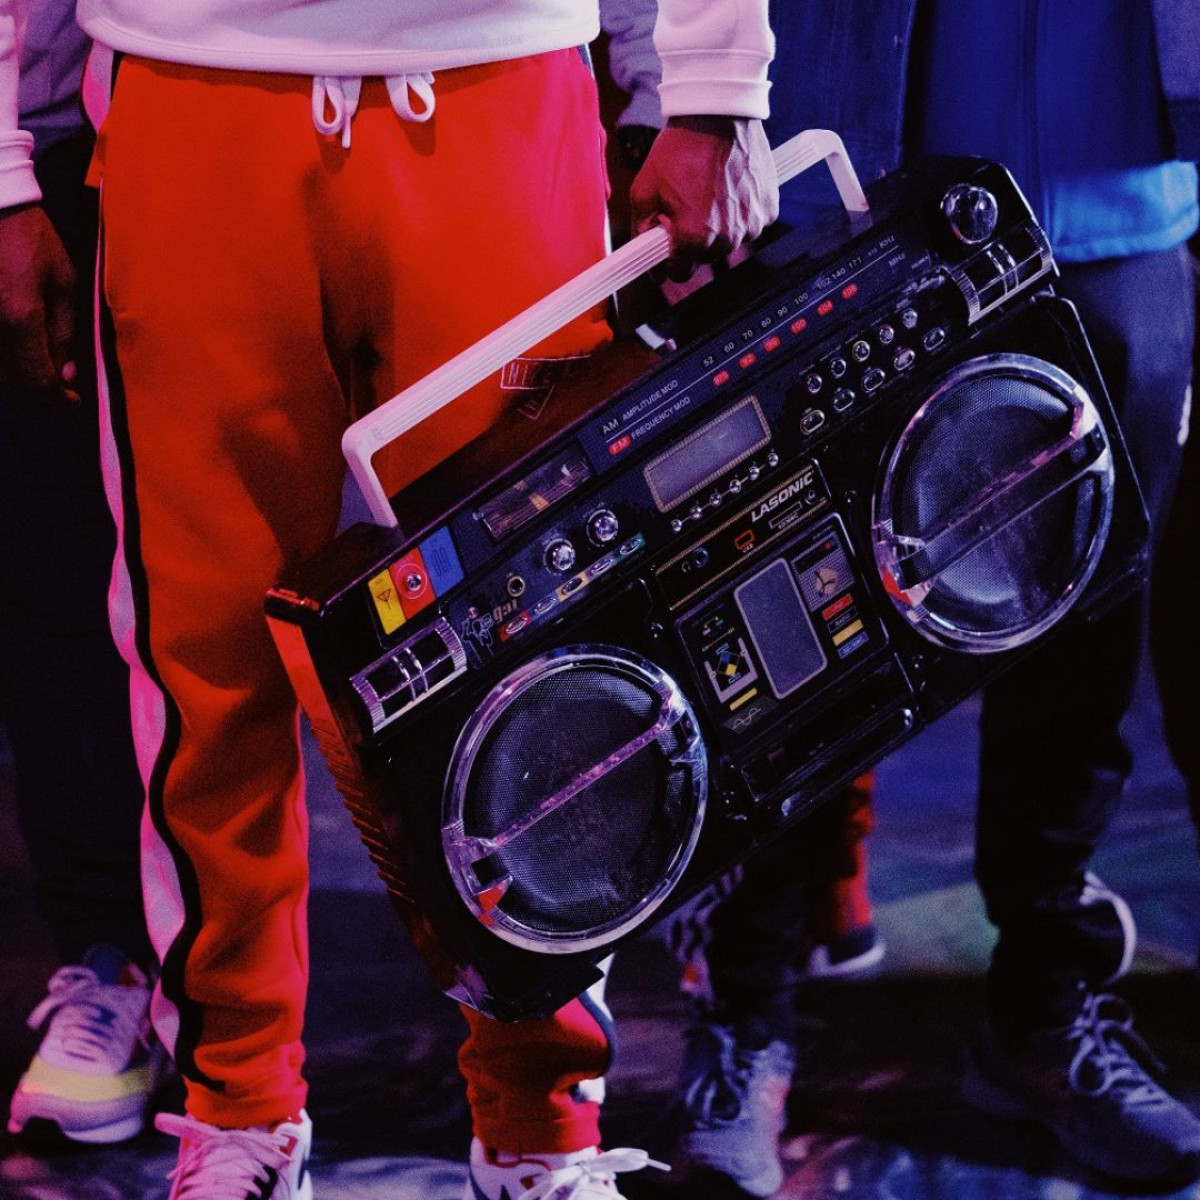 A person wearing red sweat pants holds a boombox